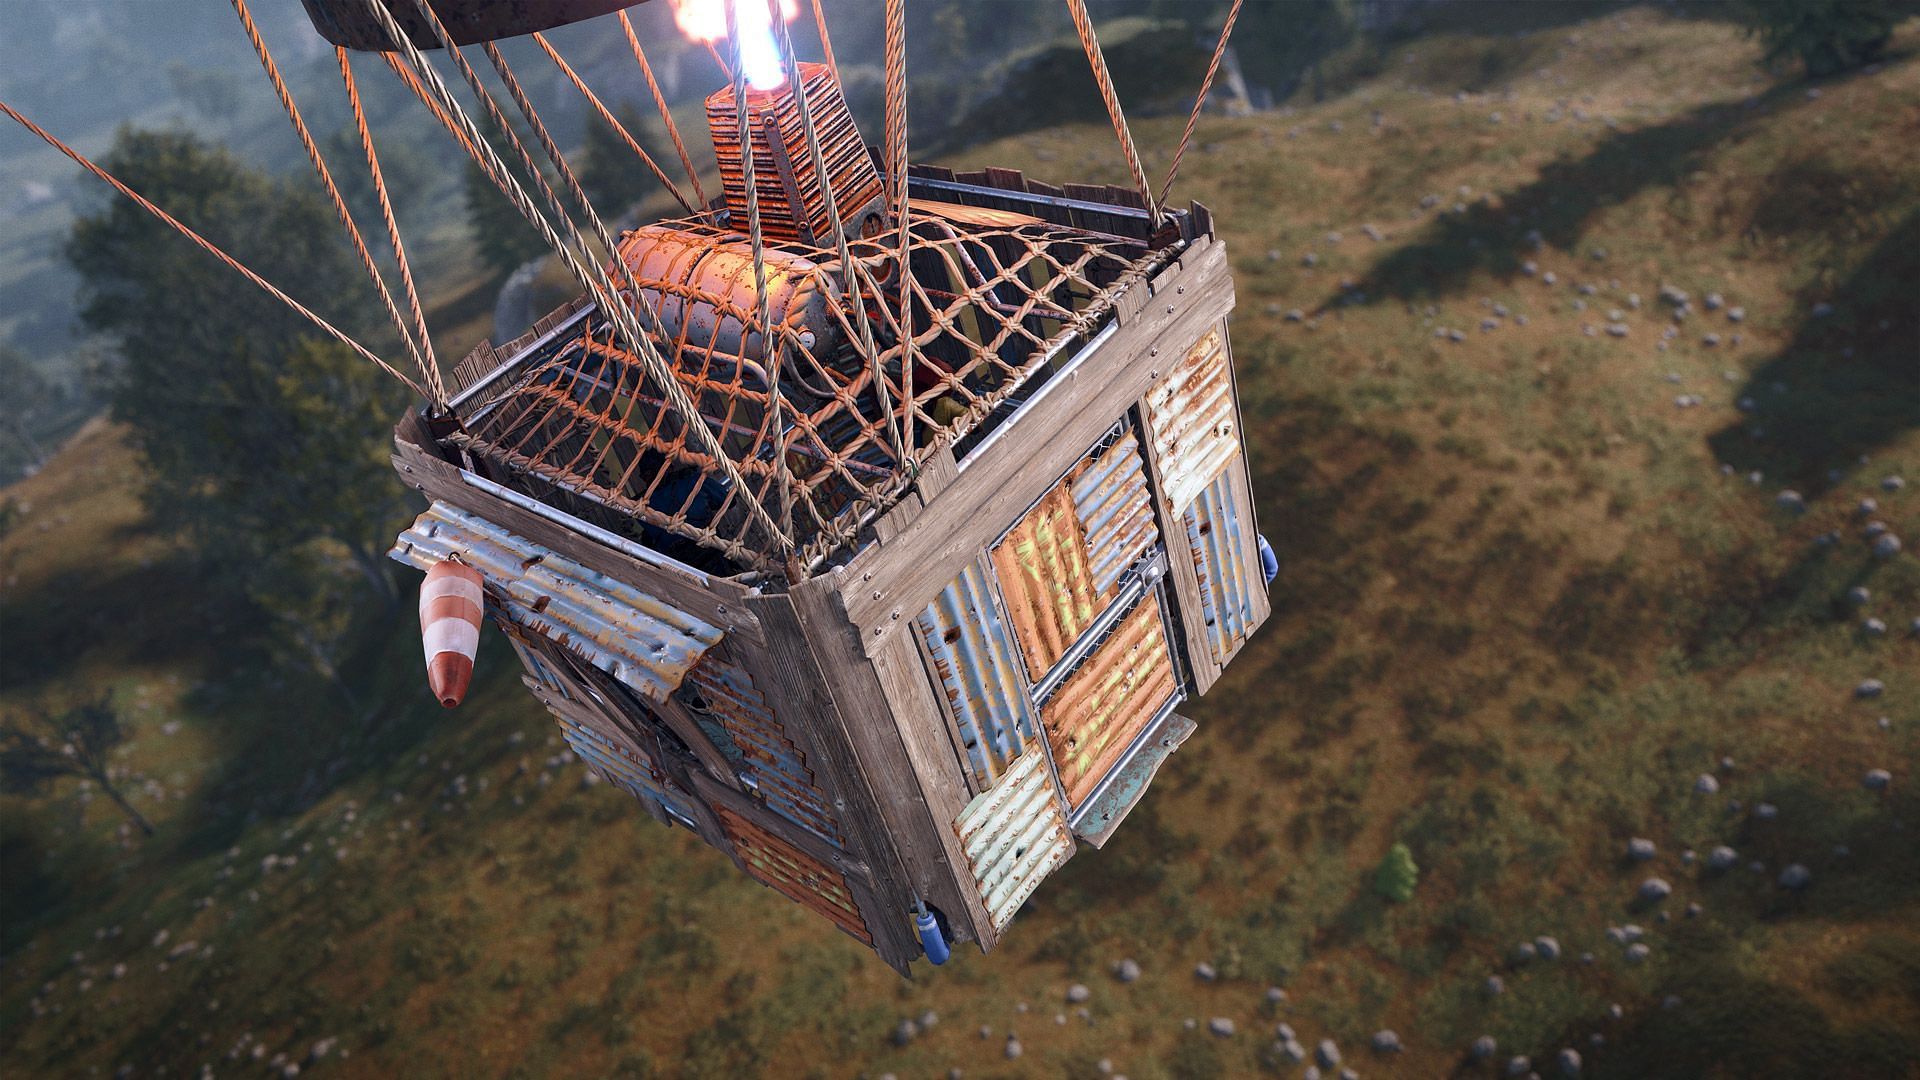 Armored Hot Air Balloon with the Airborne update (Image via Facepunch Studios)